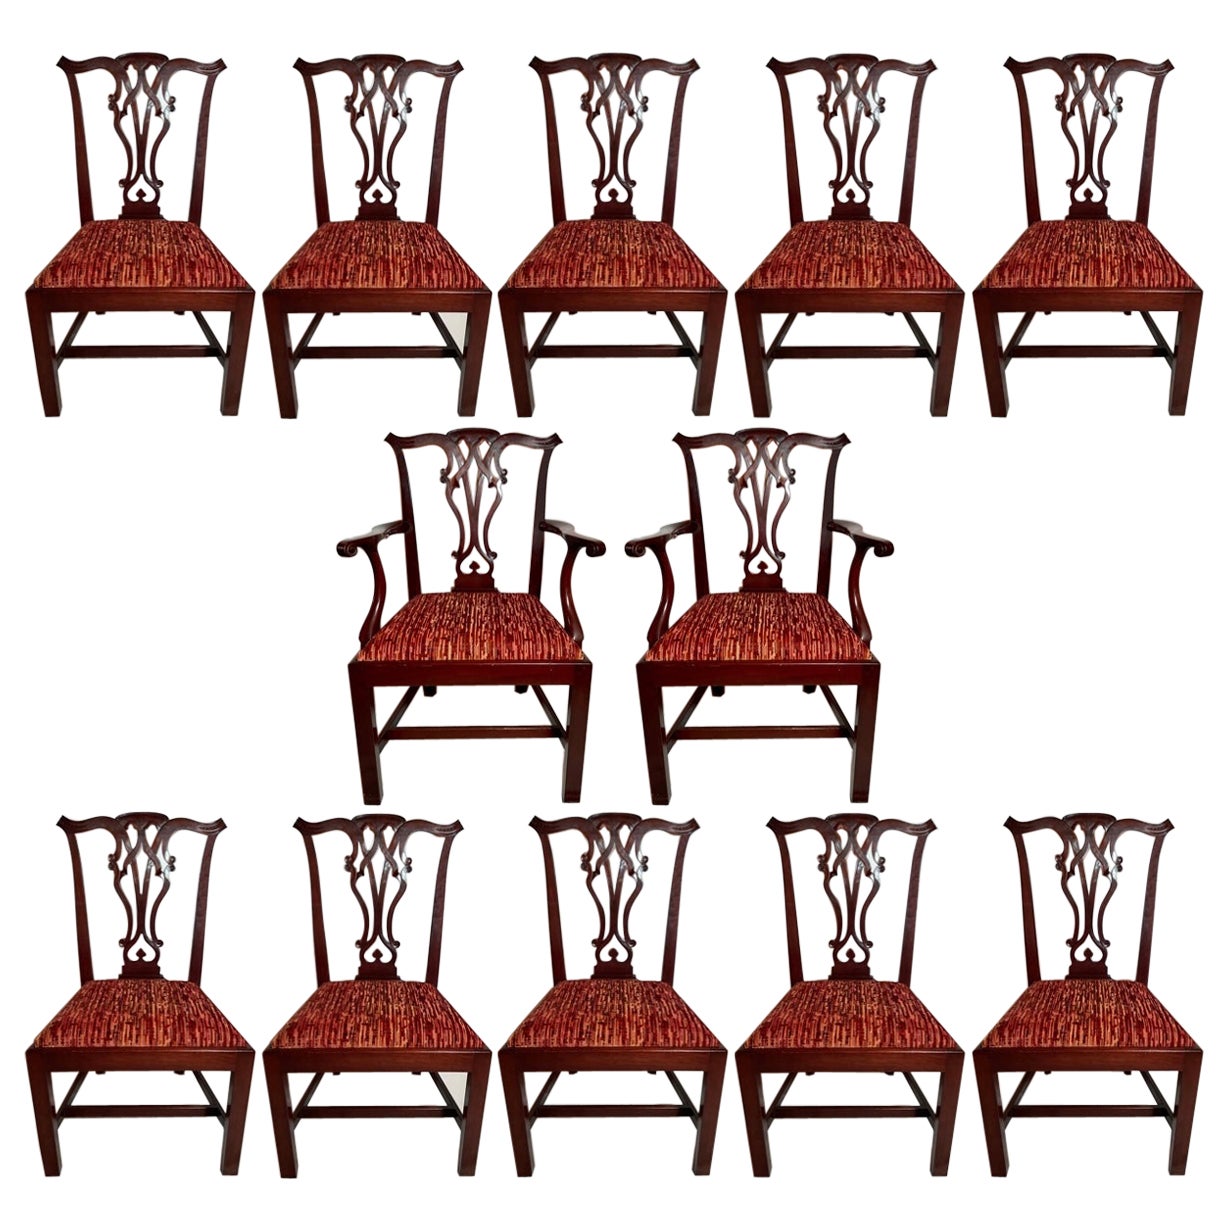 Set of 12 Antique English Mahogany Chippendale Chairs, Circa 1900. For Sale